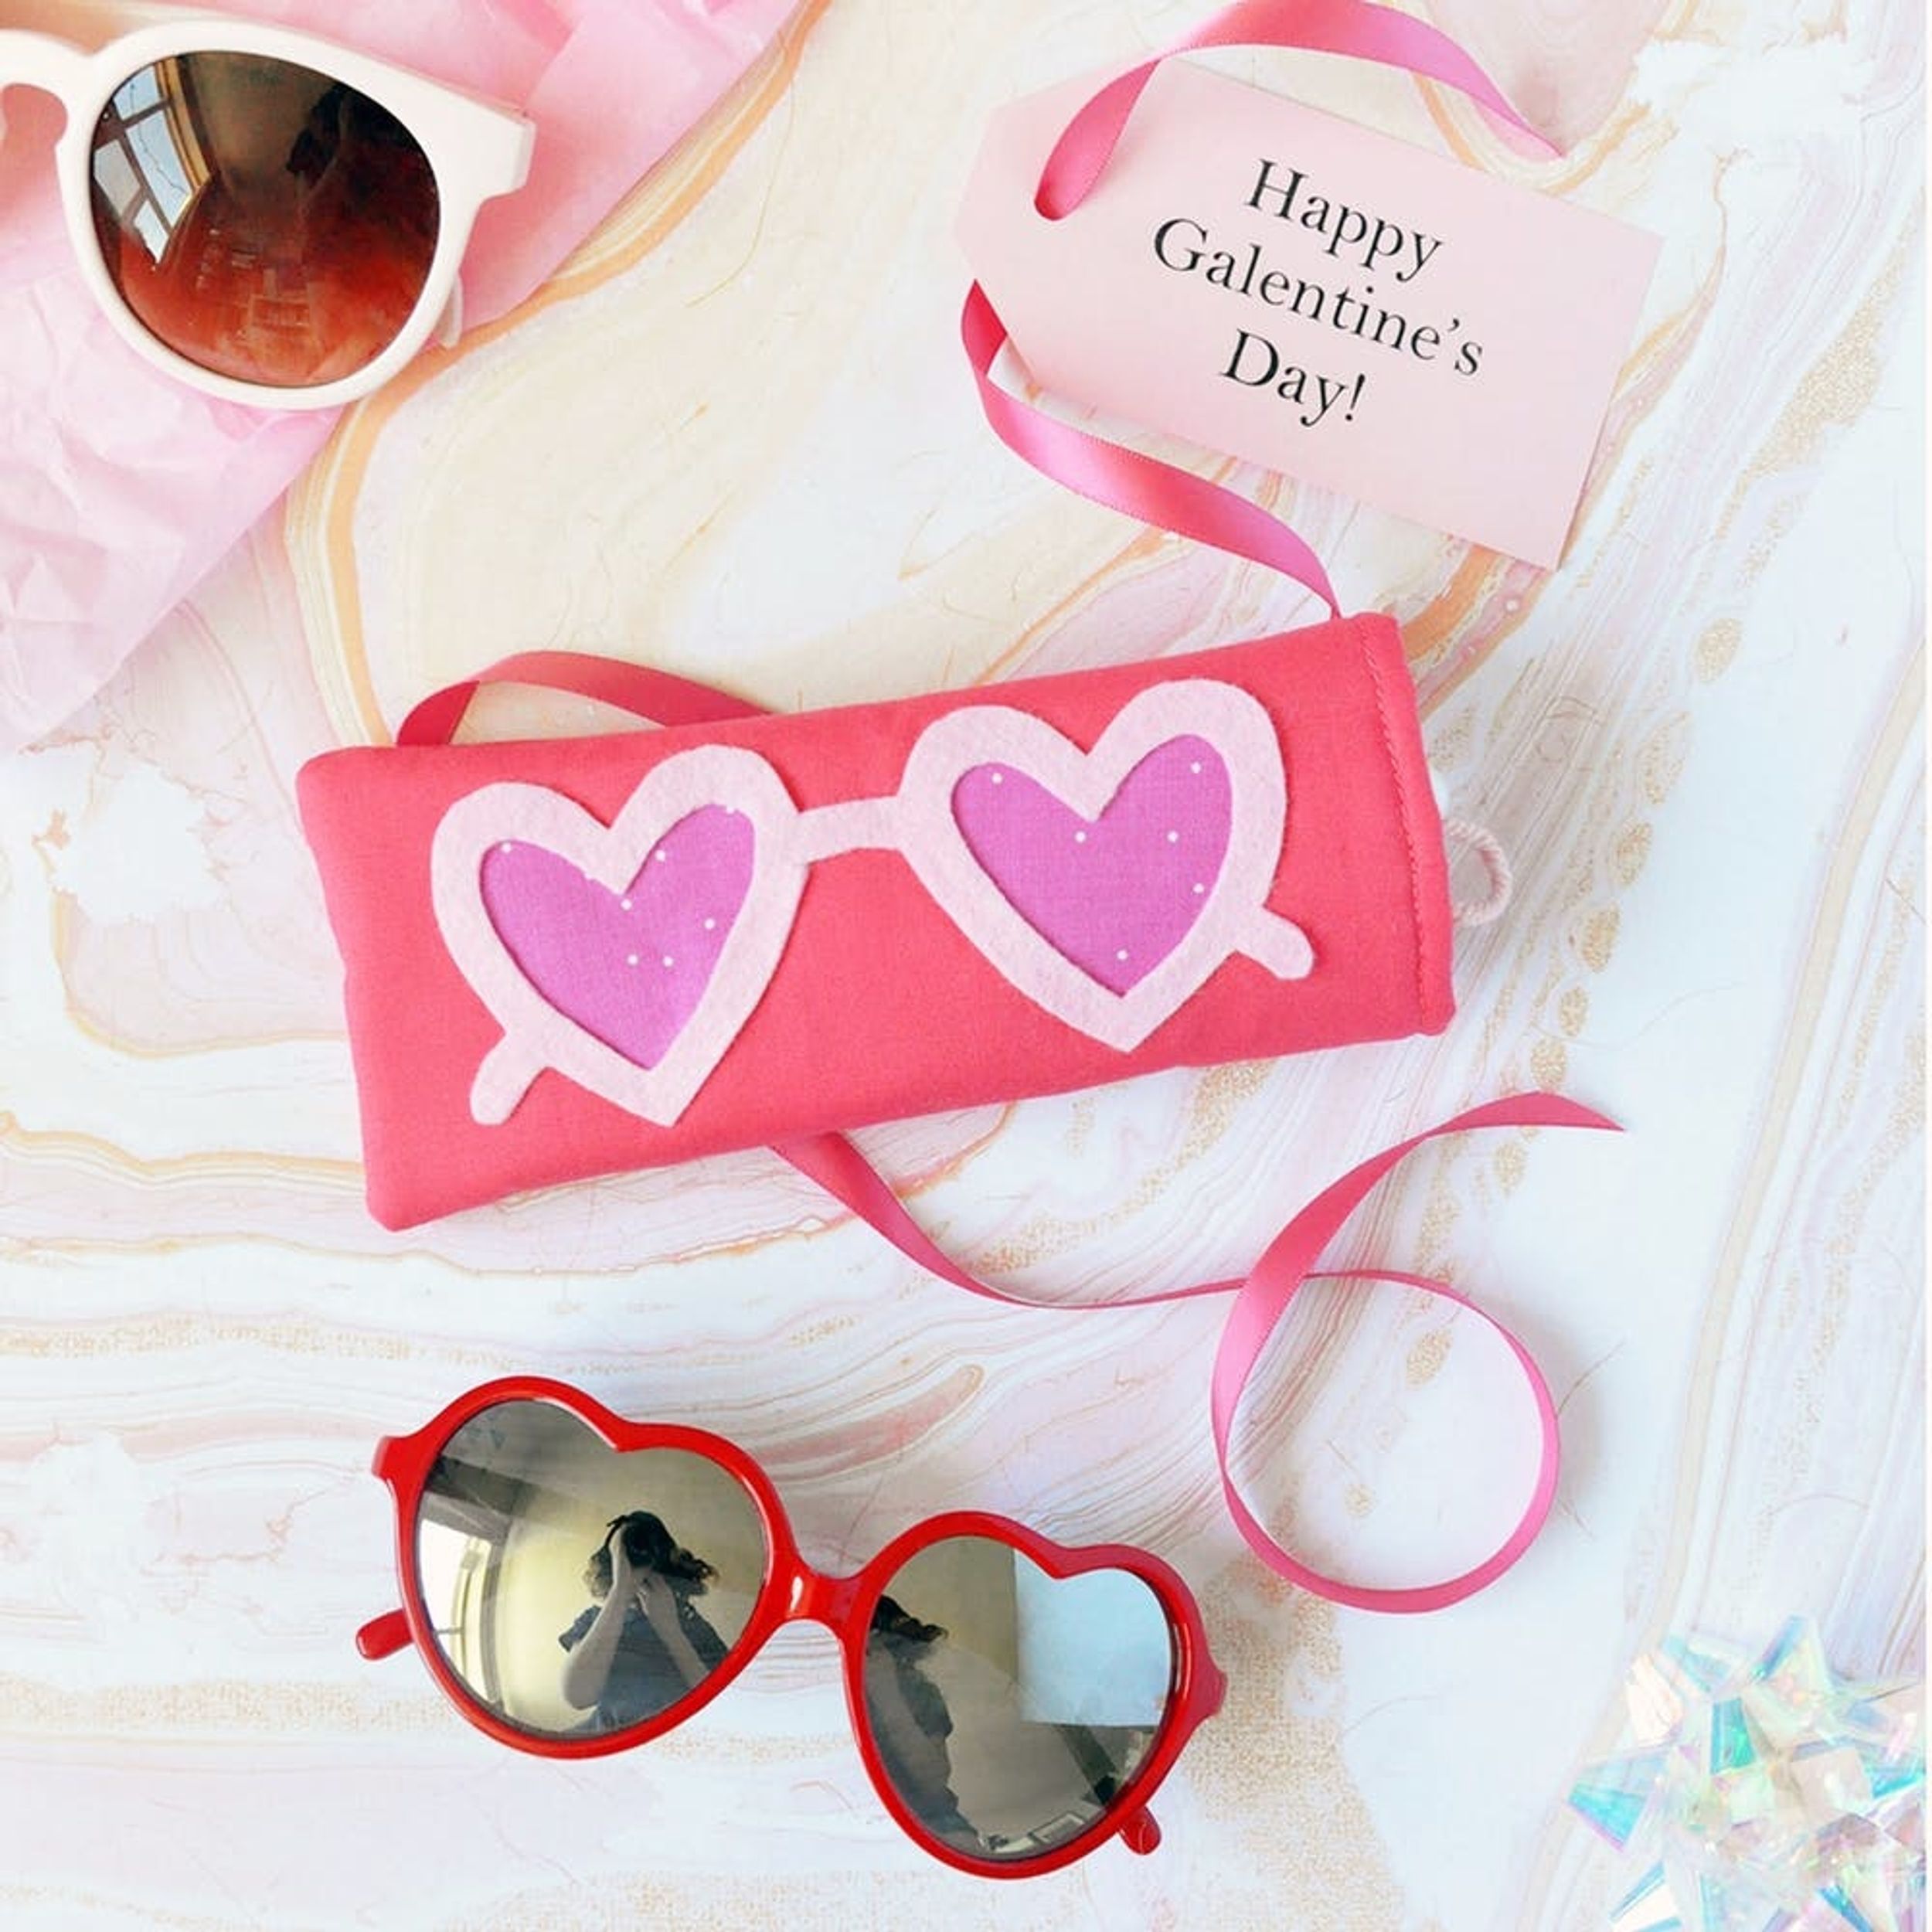 DIY These Heart-Shaped Sunglasses Cases This Galentine’s Day